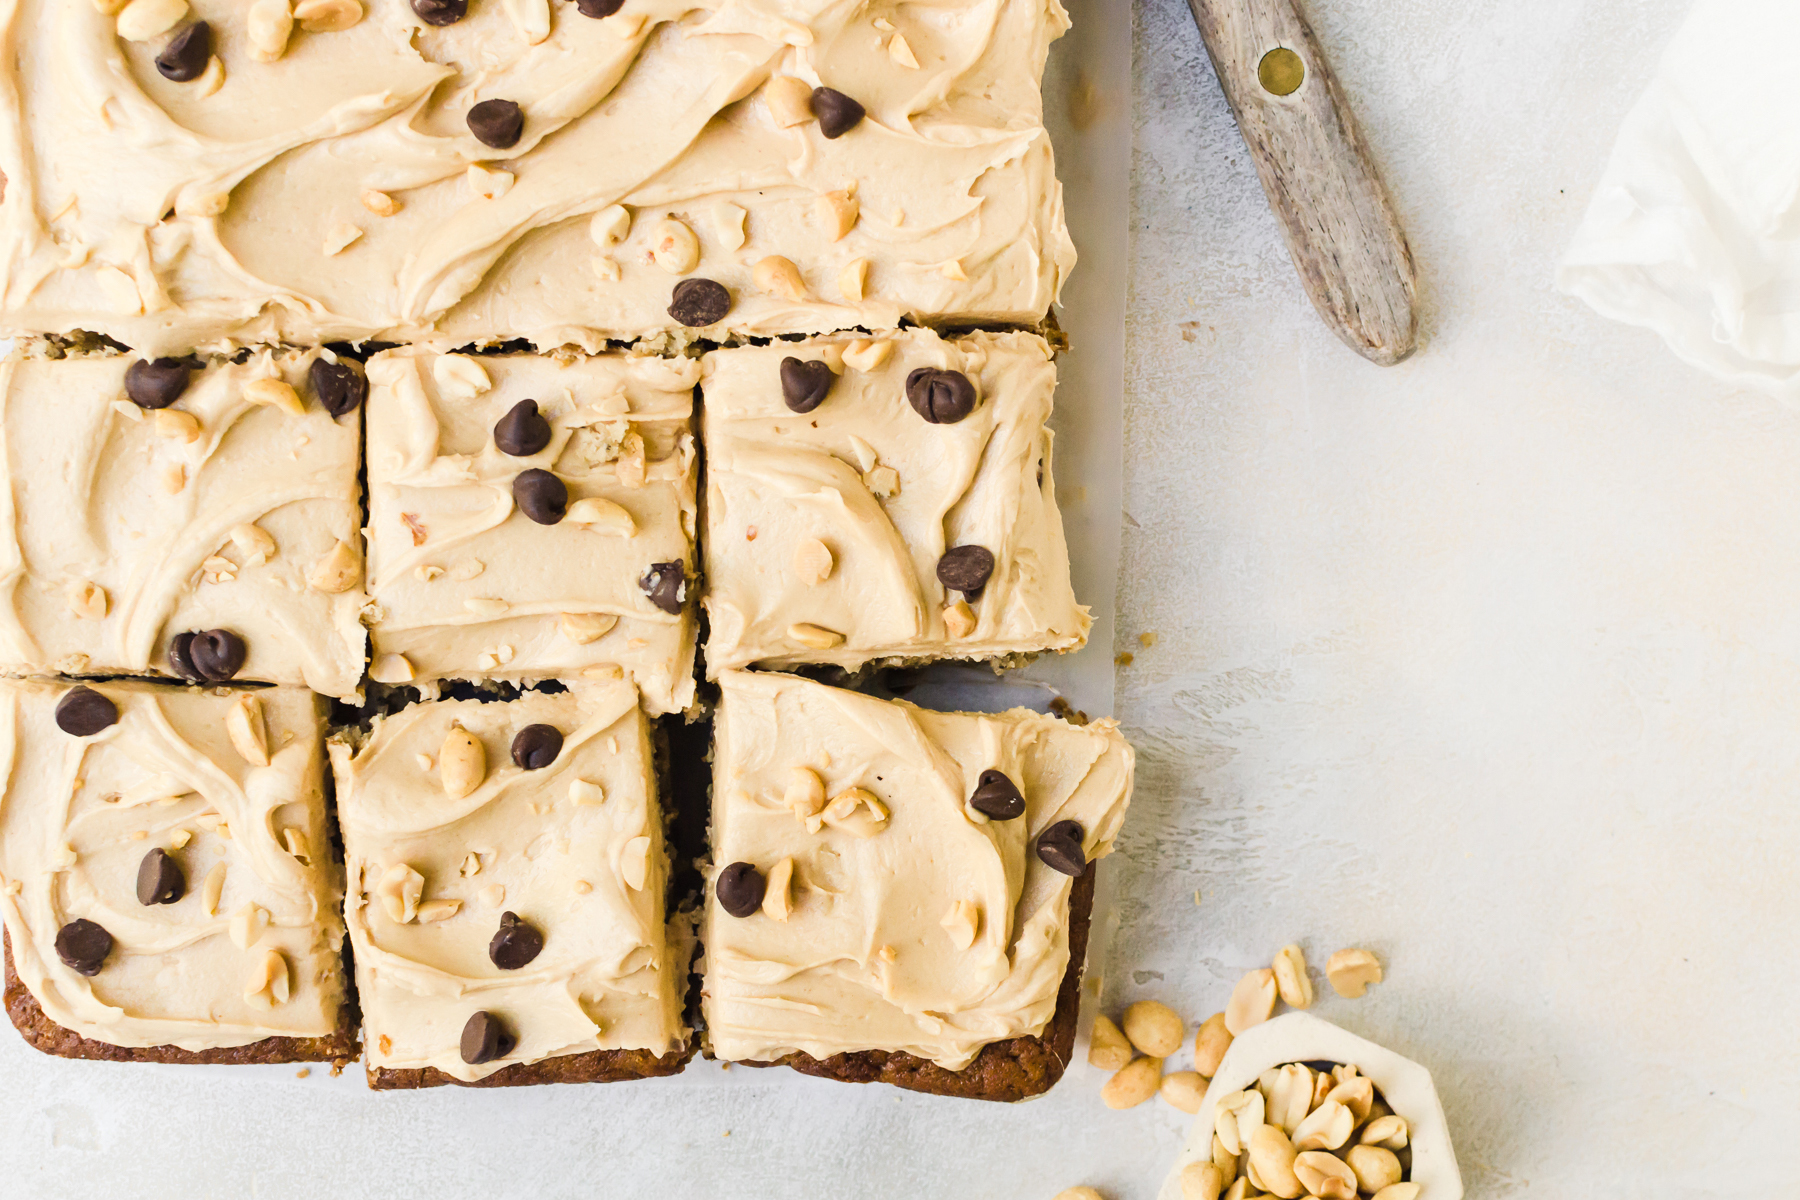 Banana Sheet Cake with Peanut Butter Frosting Photo